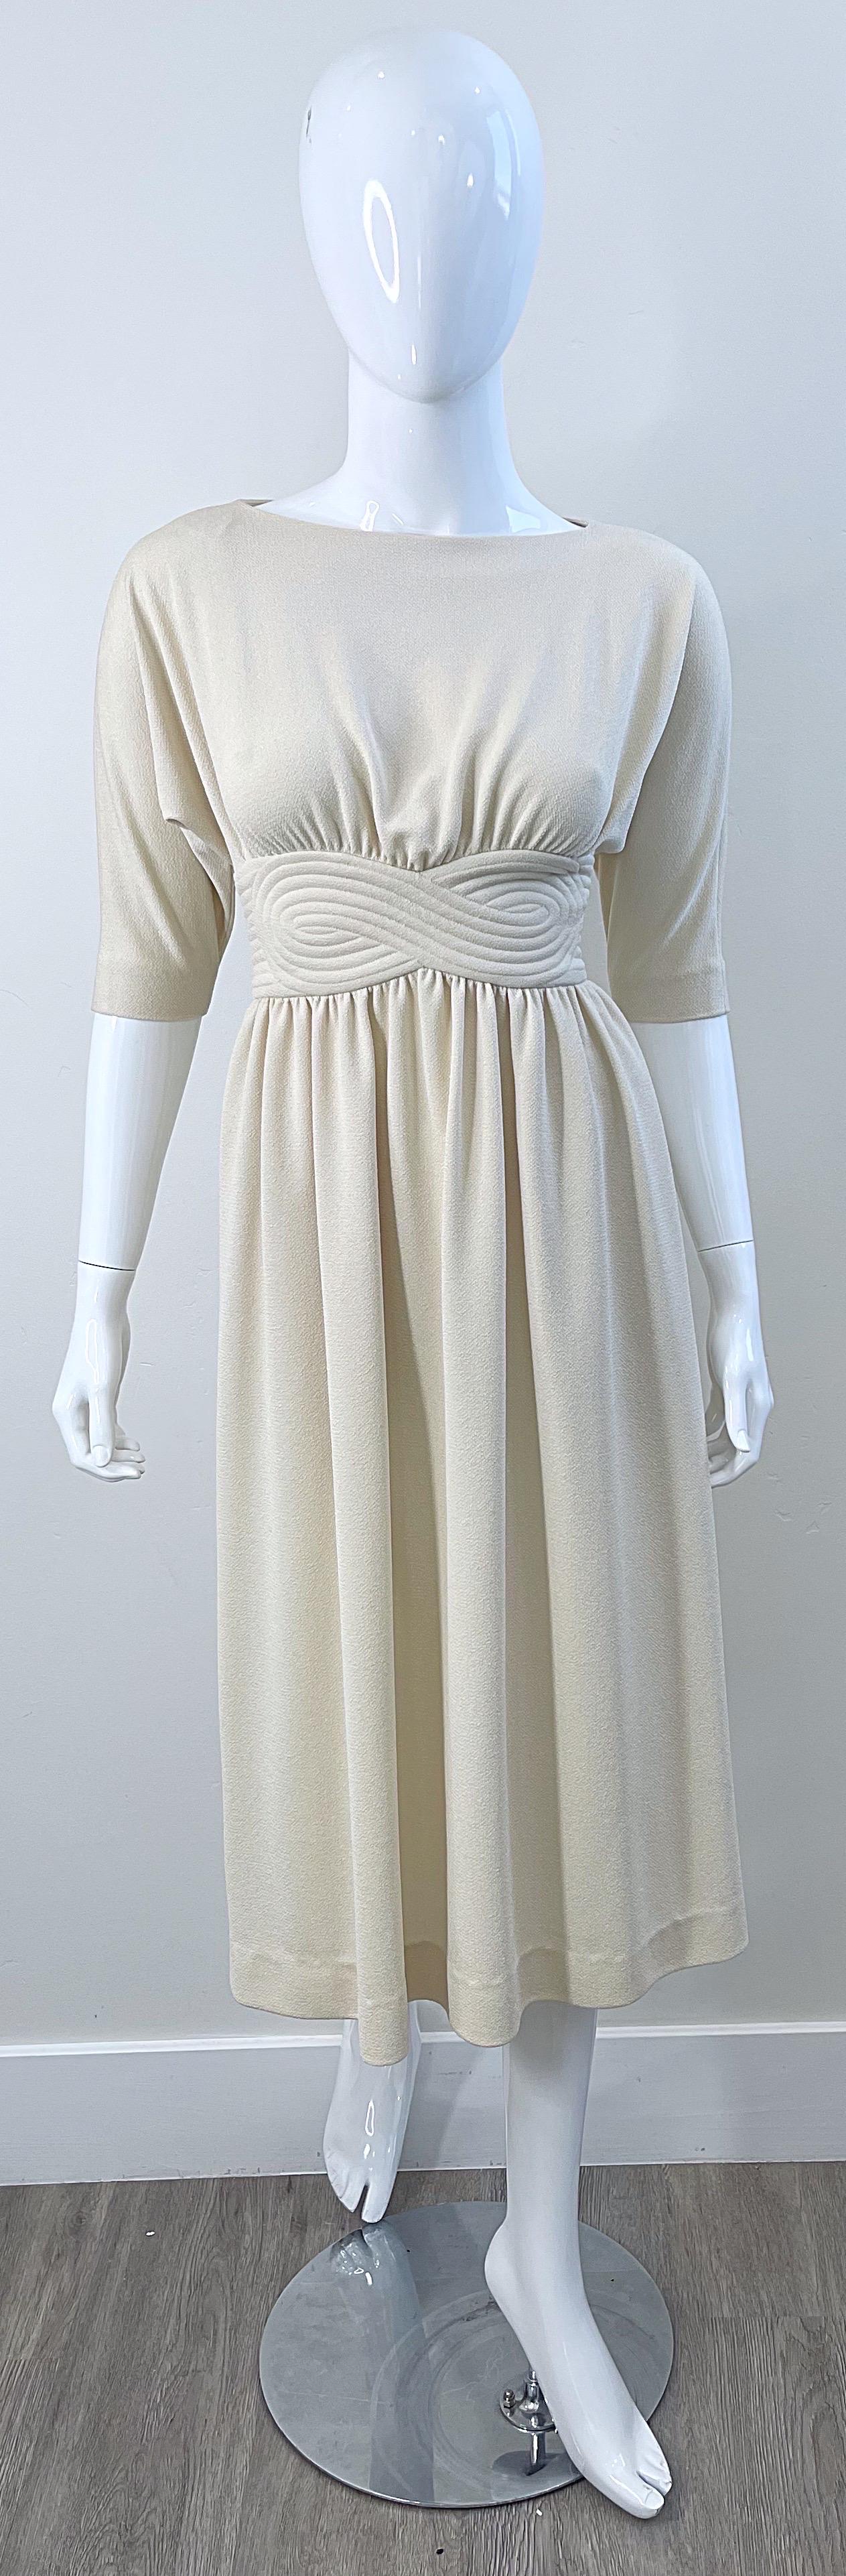 Chic early 70s DONALD BROOKS ivory off-white 3/4 sleeves crepe dress ! Features a tailored bodice, with a Grecian inspired waistband. Hidden zipper up the back with fabric covered buttons on top. Pockets at each side of the hips. 
Brooks was an